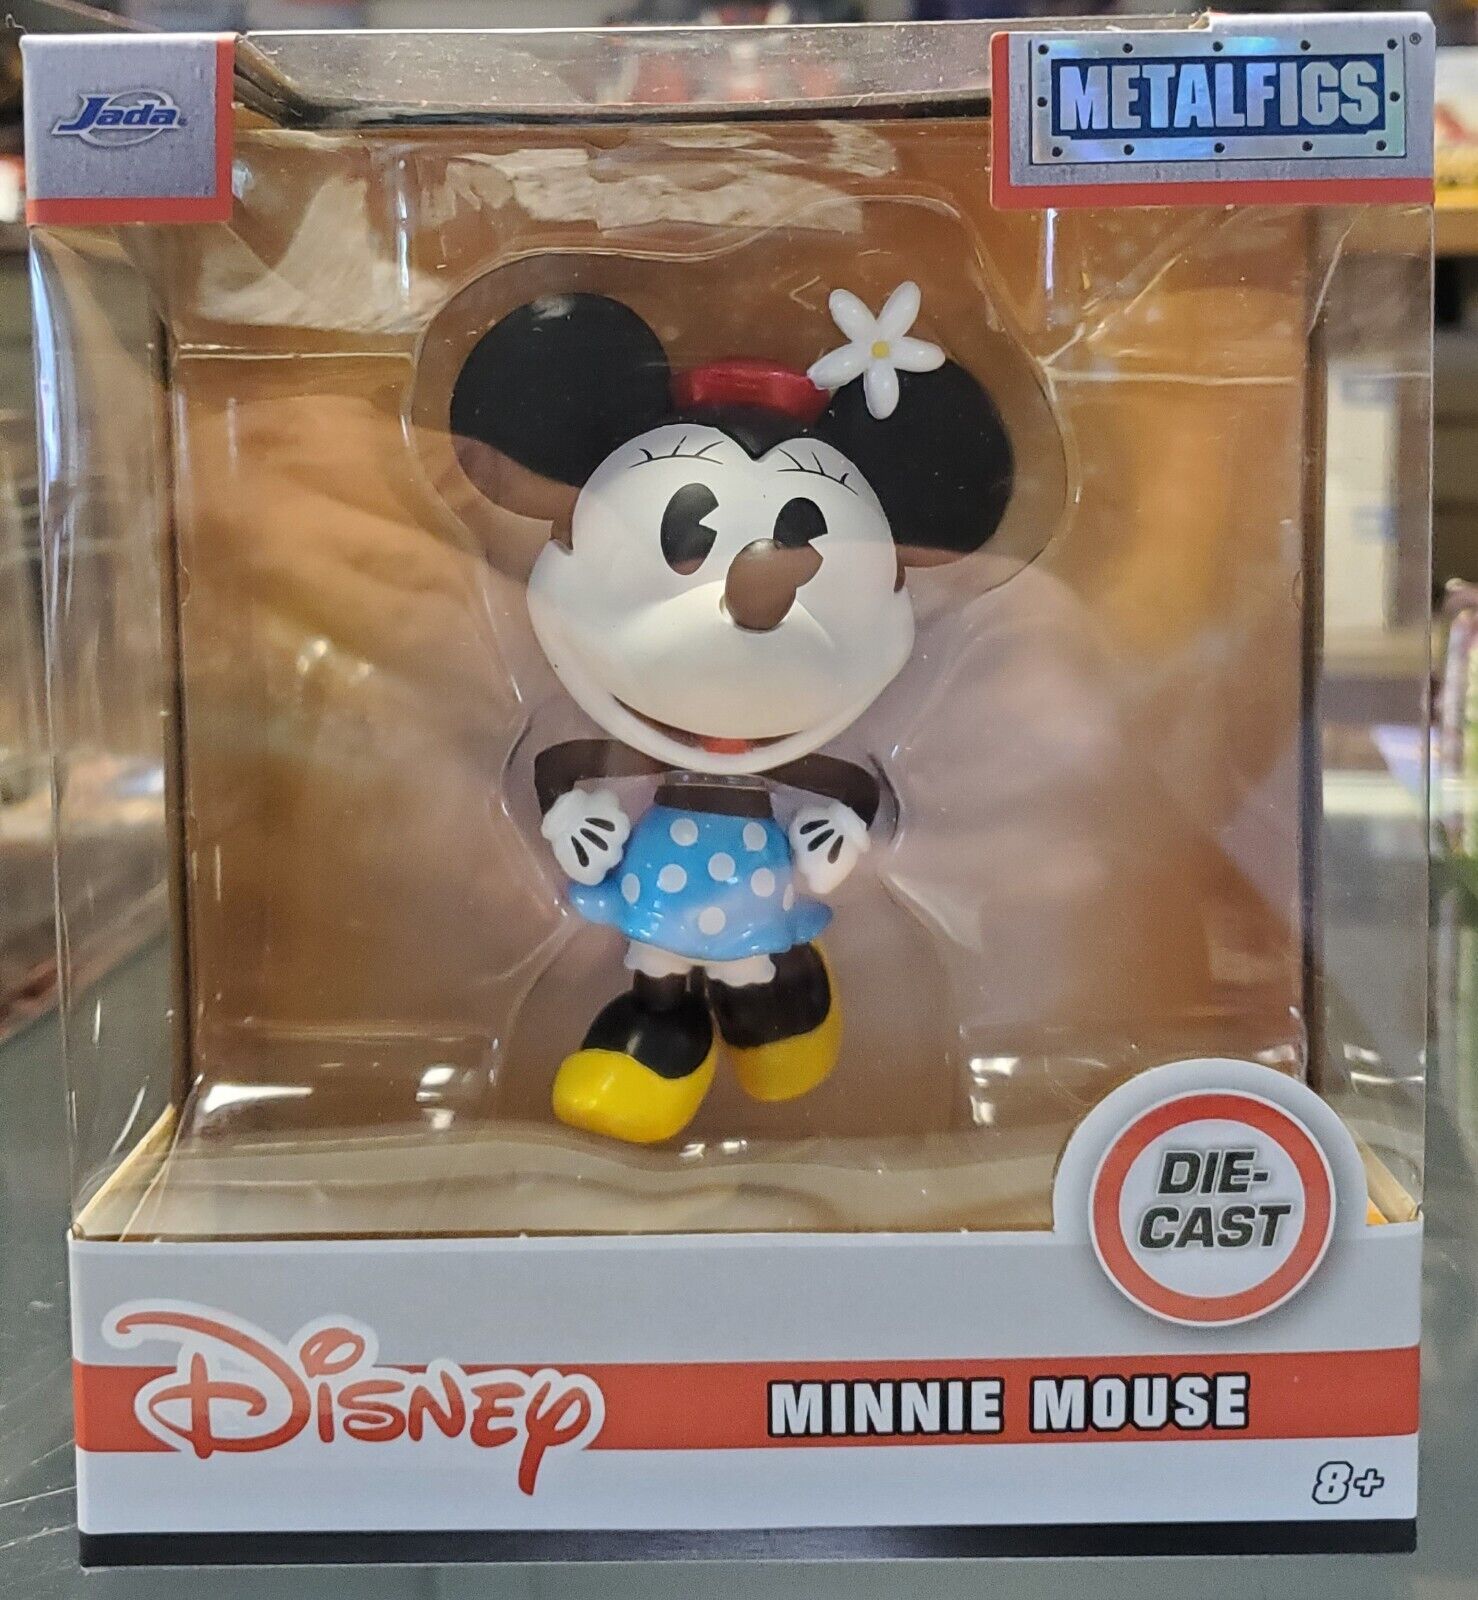 Disney MetalFigs Collectible Minnie Mouse Figurine New In Box 4